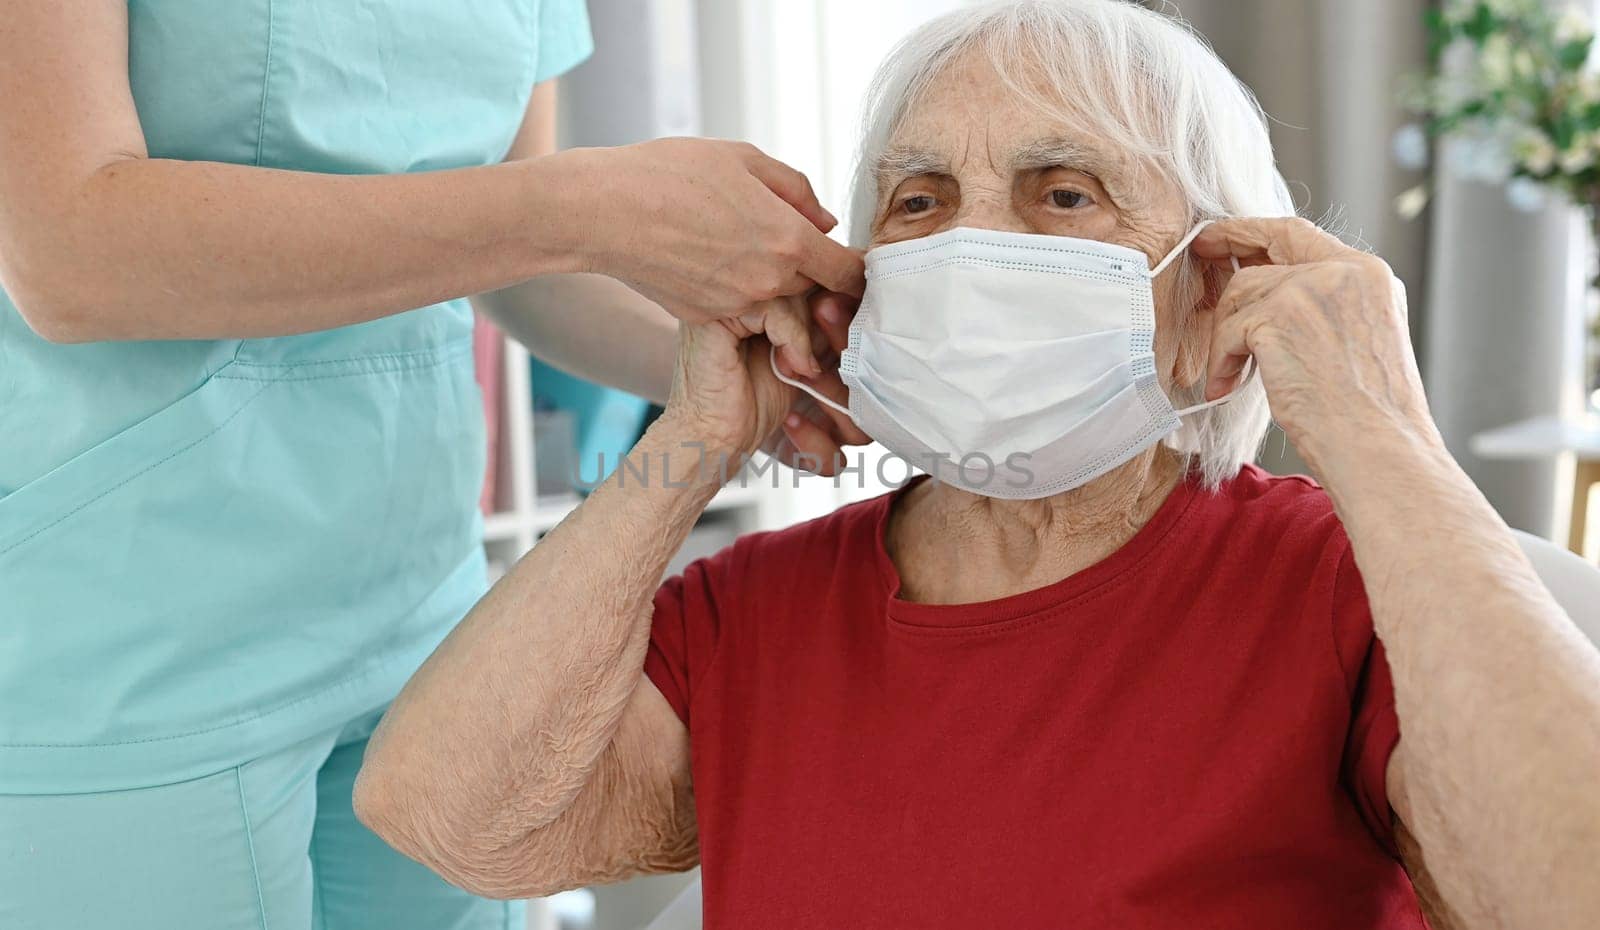 Nurse Helps Elderly Woman Put On Medical Protective Mask During Period Of Viral And Respiratory Diseases